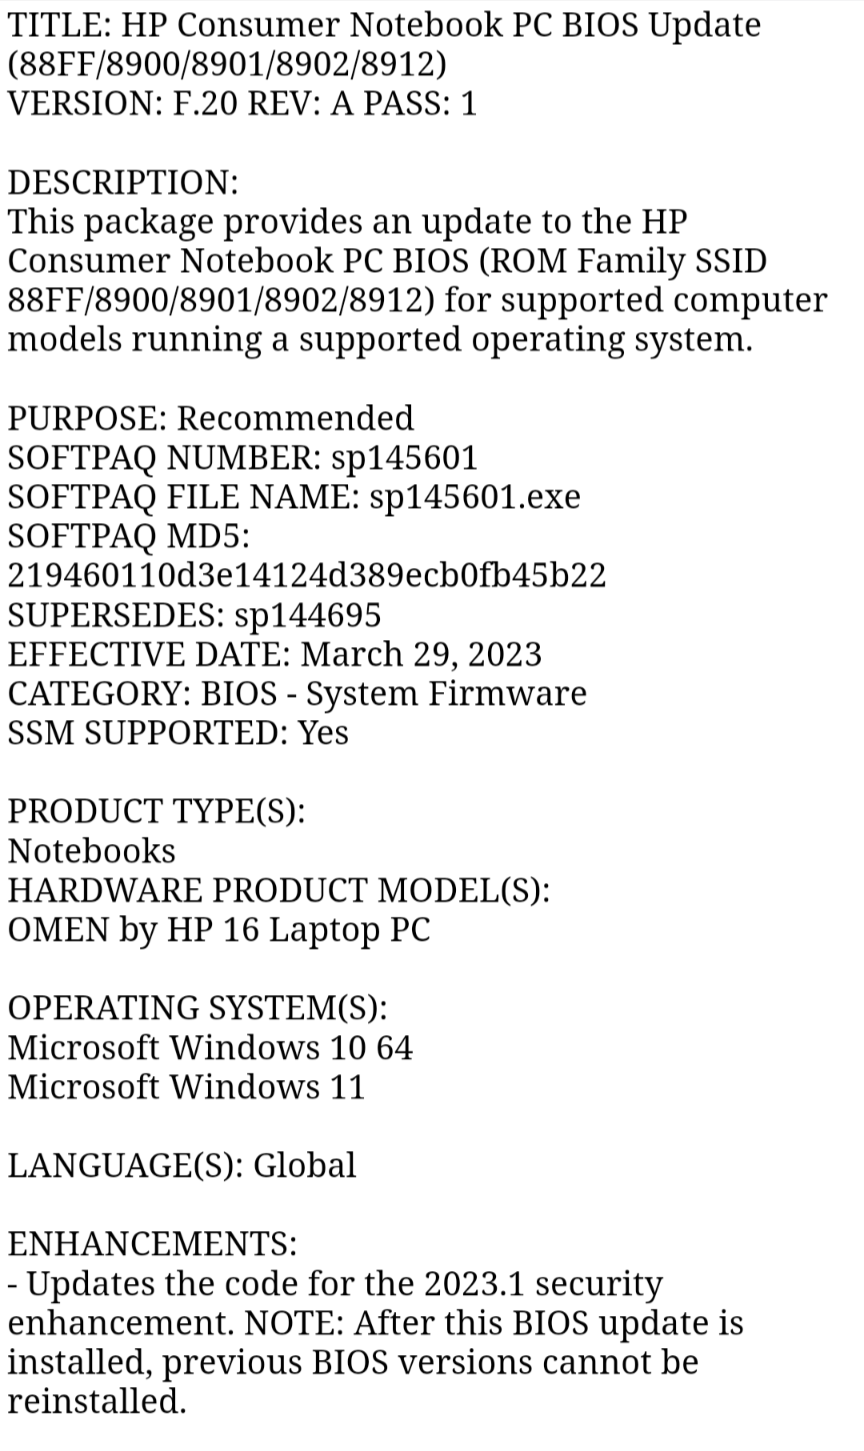 Clearing pending image hp bios stuck - HP Support Community - 8856668